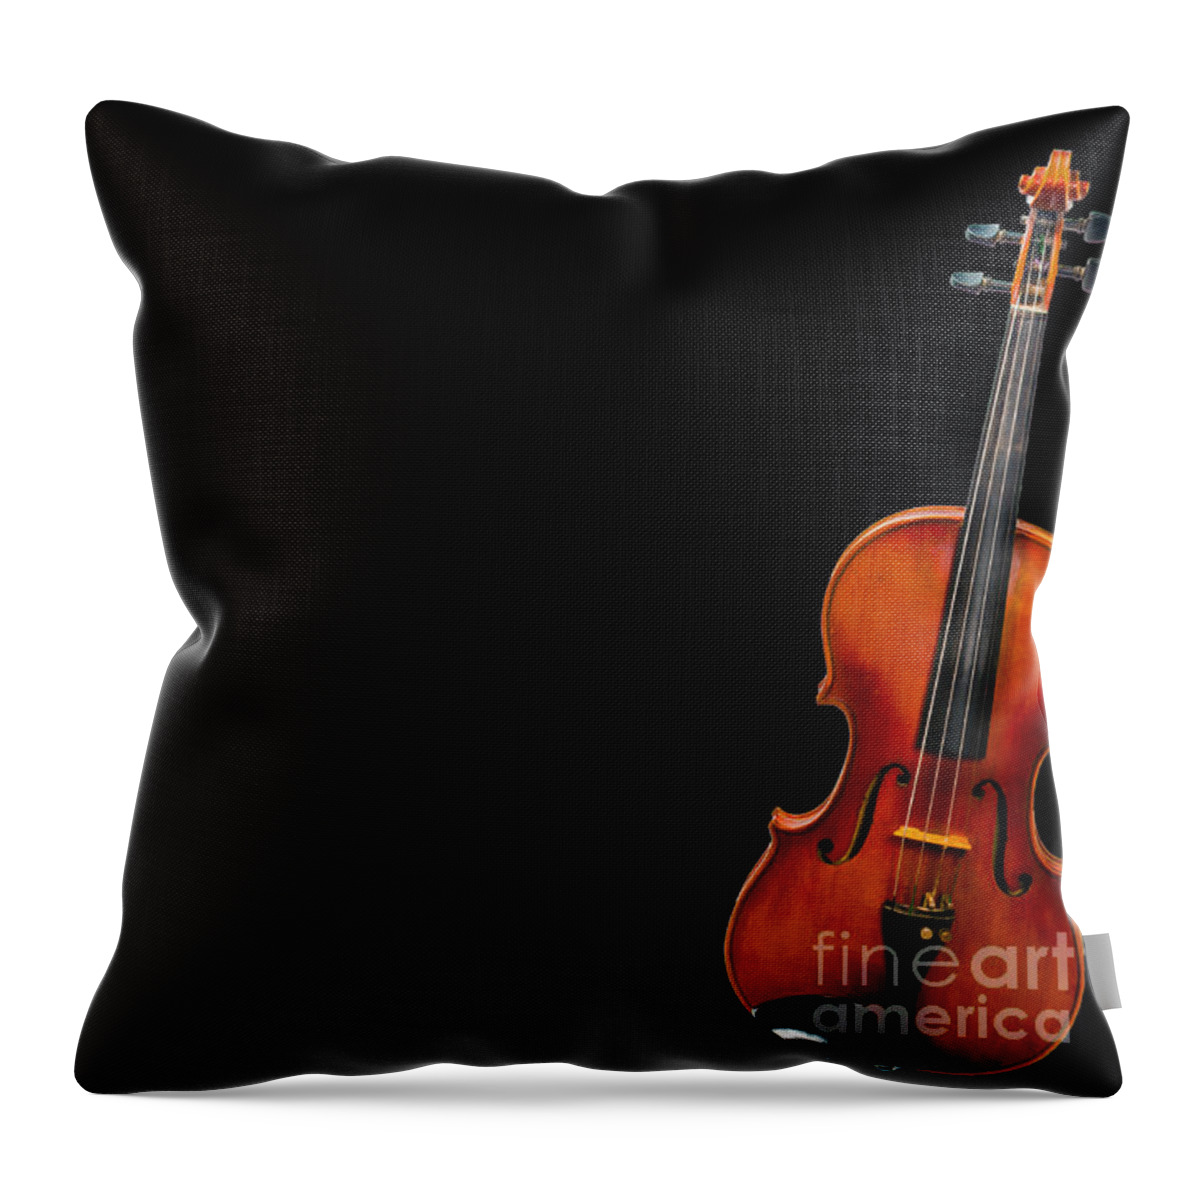 Leaning Throw Pillow featuring the photograph Leaning by Torbjorn Swenelius